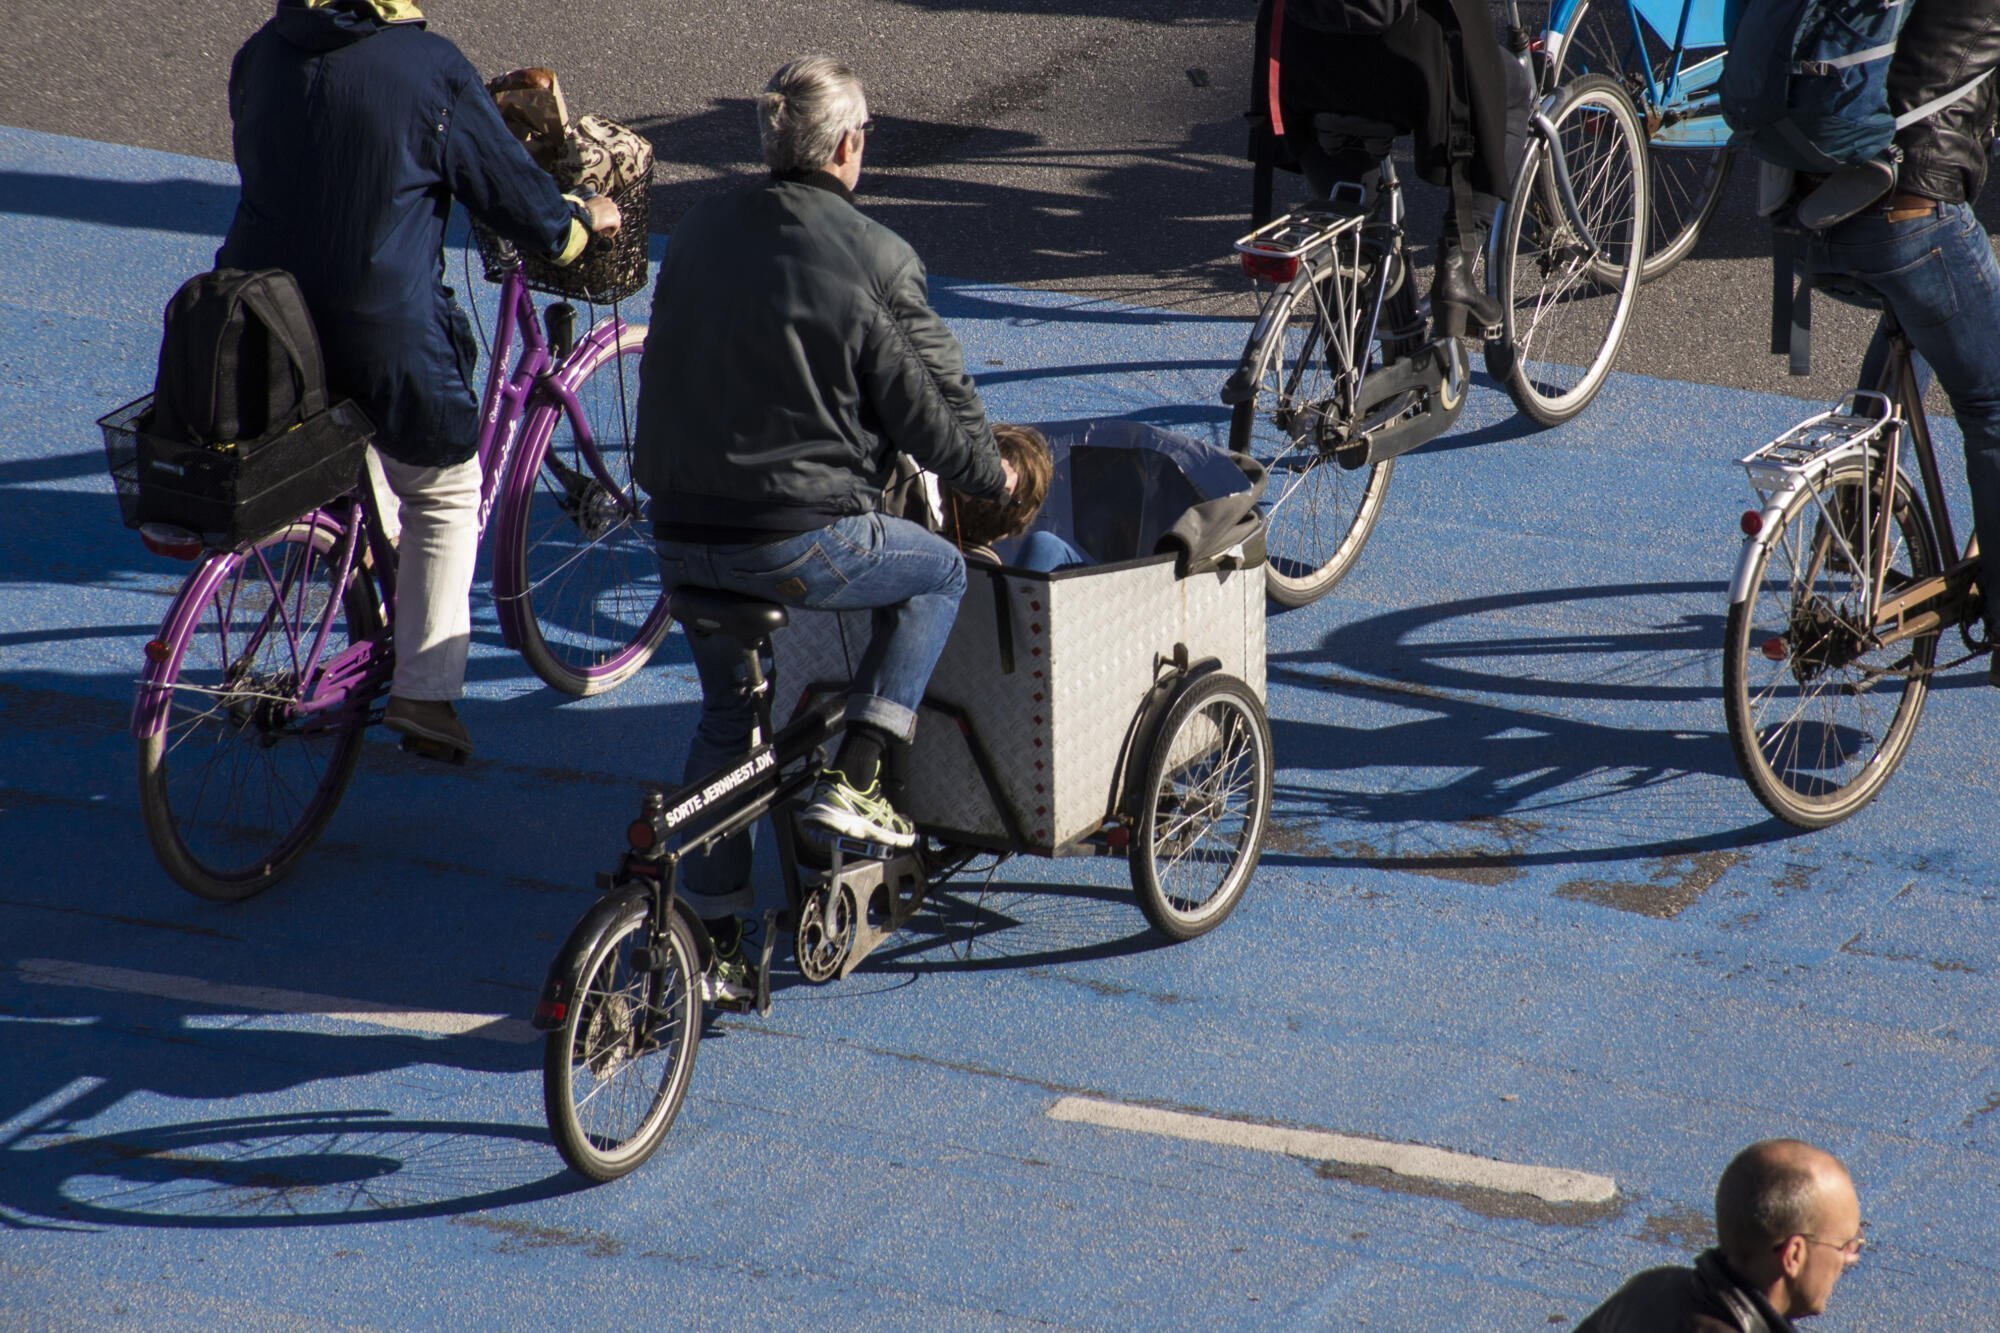 The cargo bike potential